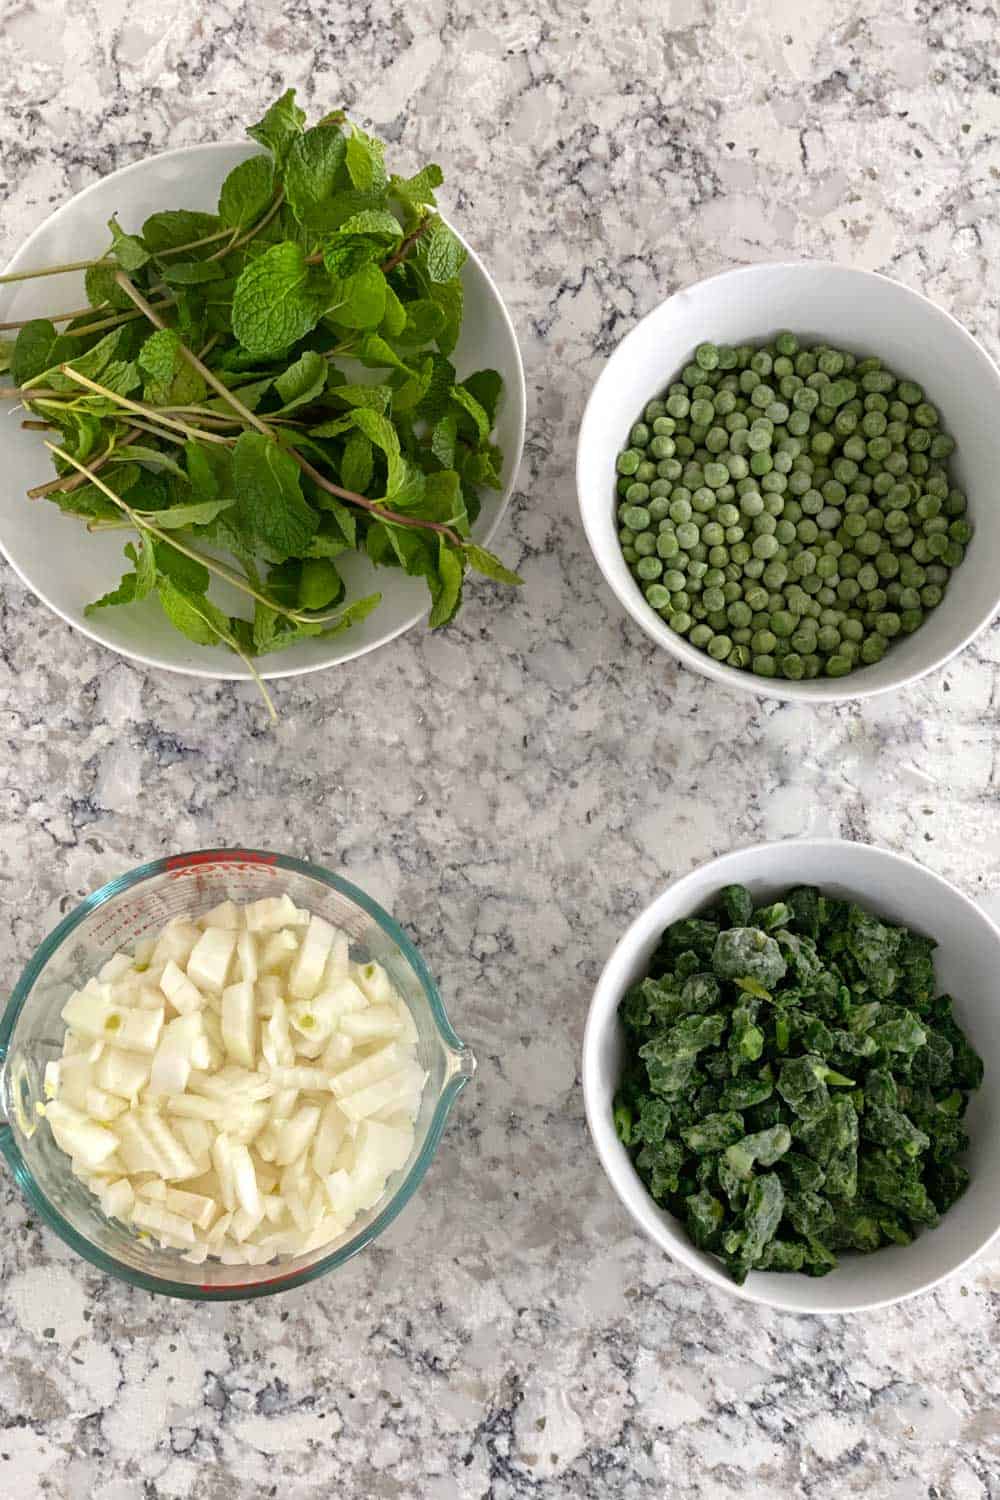 ingredients for pea and spinach soup with fresh mint: a bowl of frozen peas, a bowl of frozen spinach, a bowl of fresh mint sprigs and a measuring cup with chopped onions.